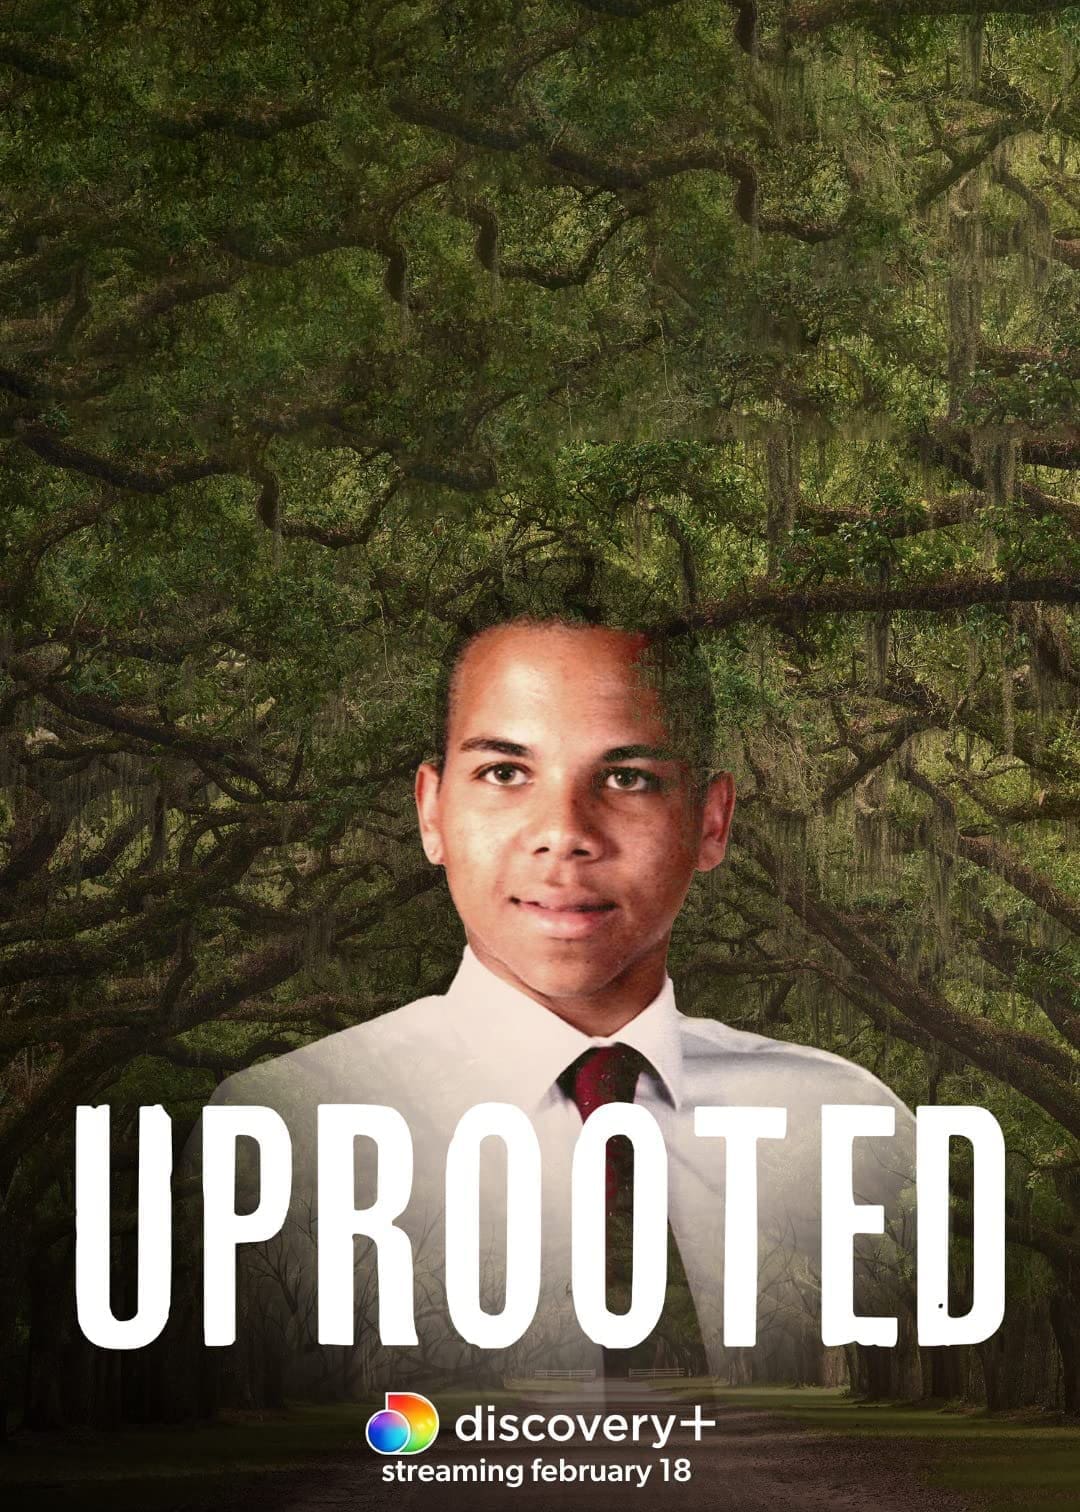 UPROOTED